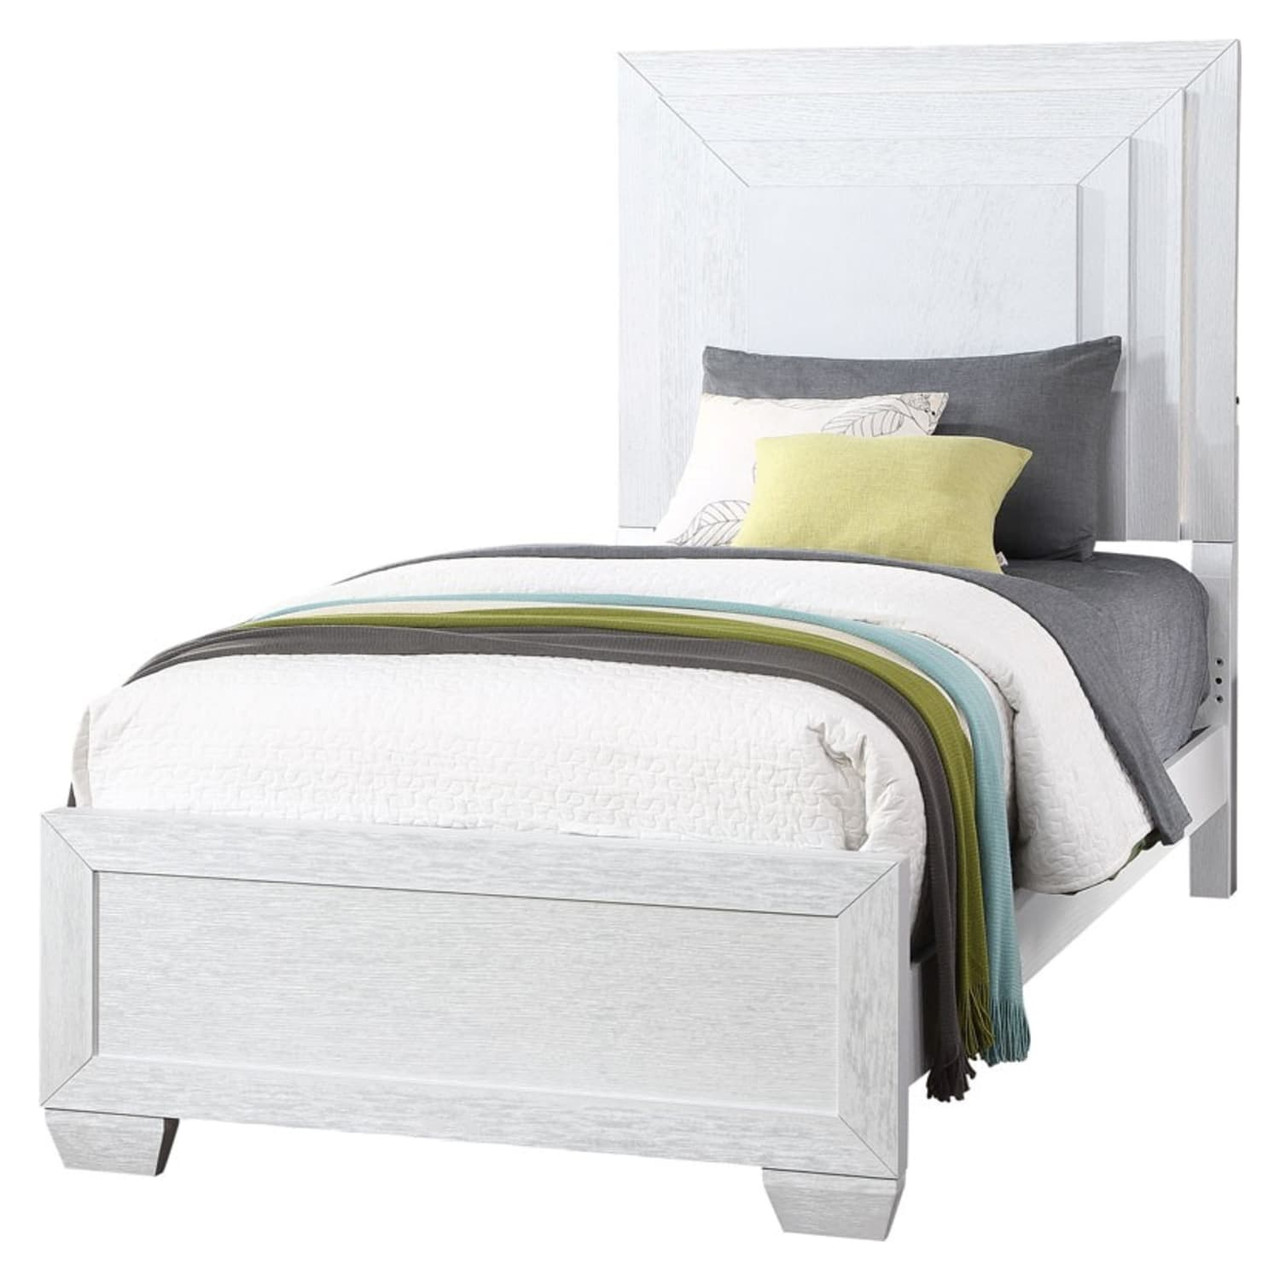 Fantasy Youth Bedroom Twin Bed